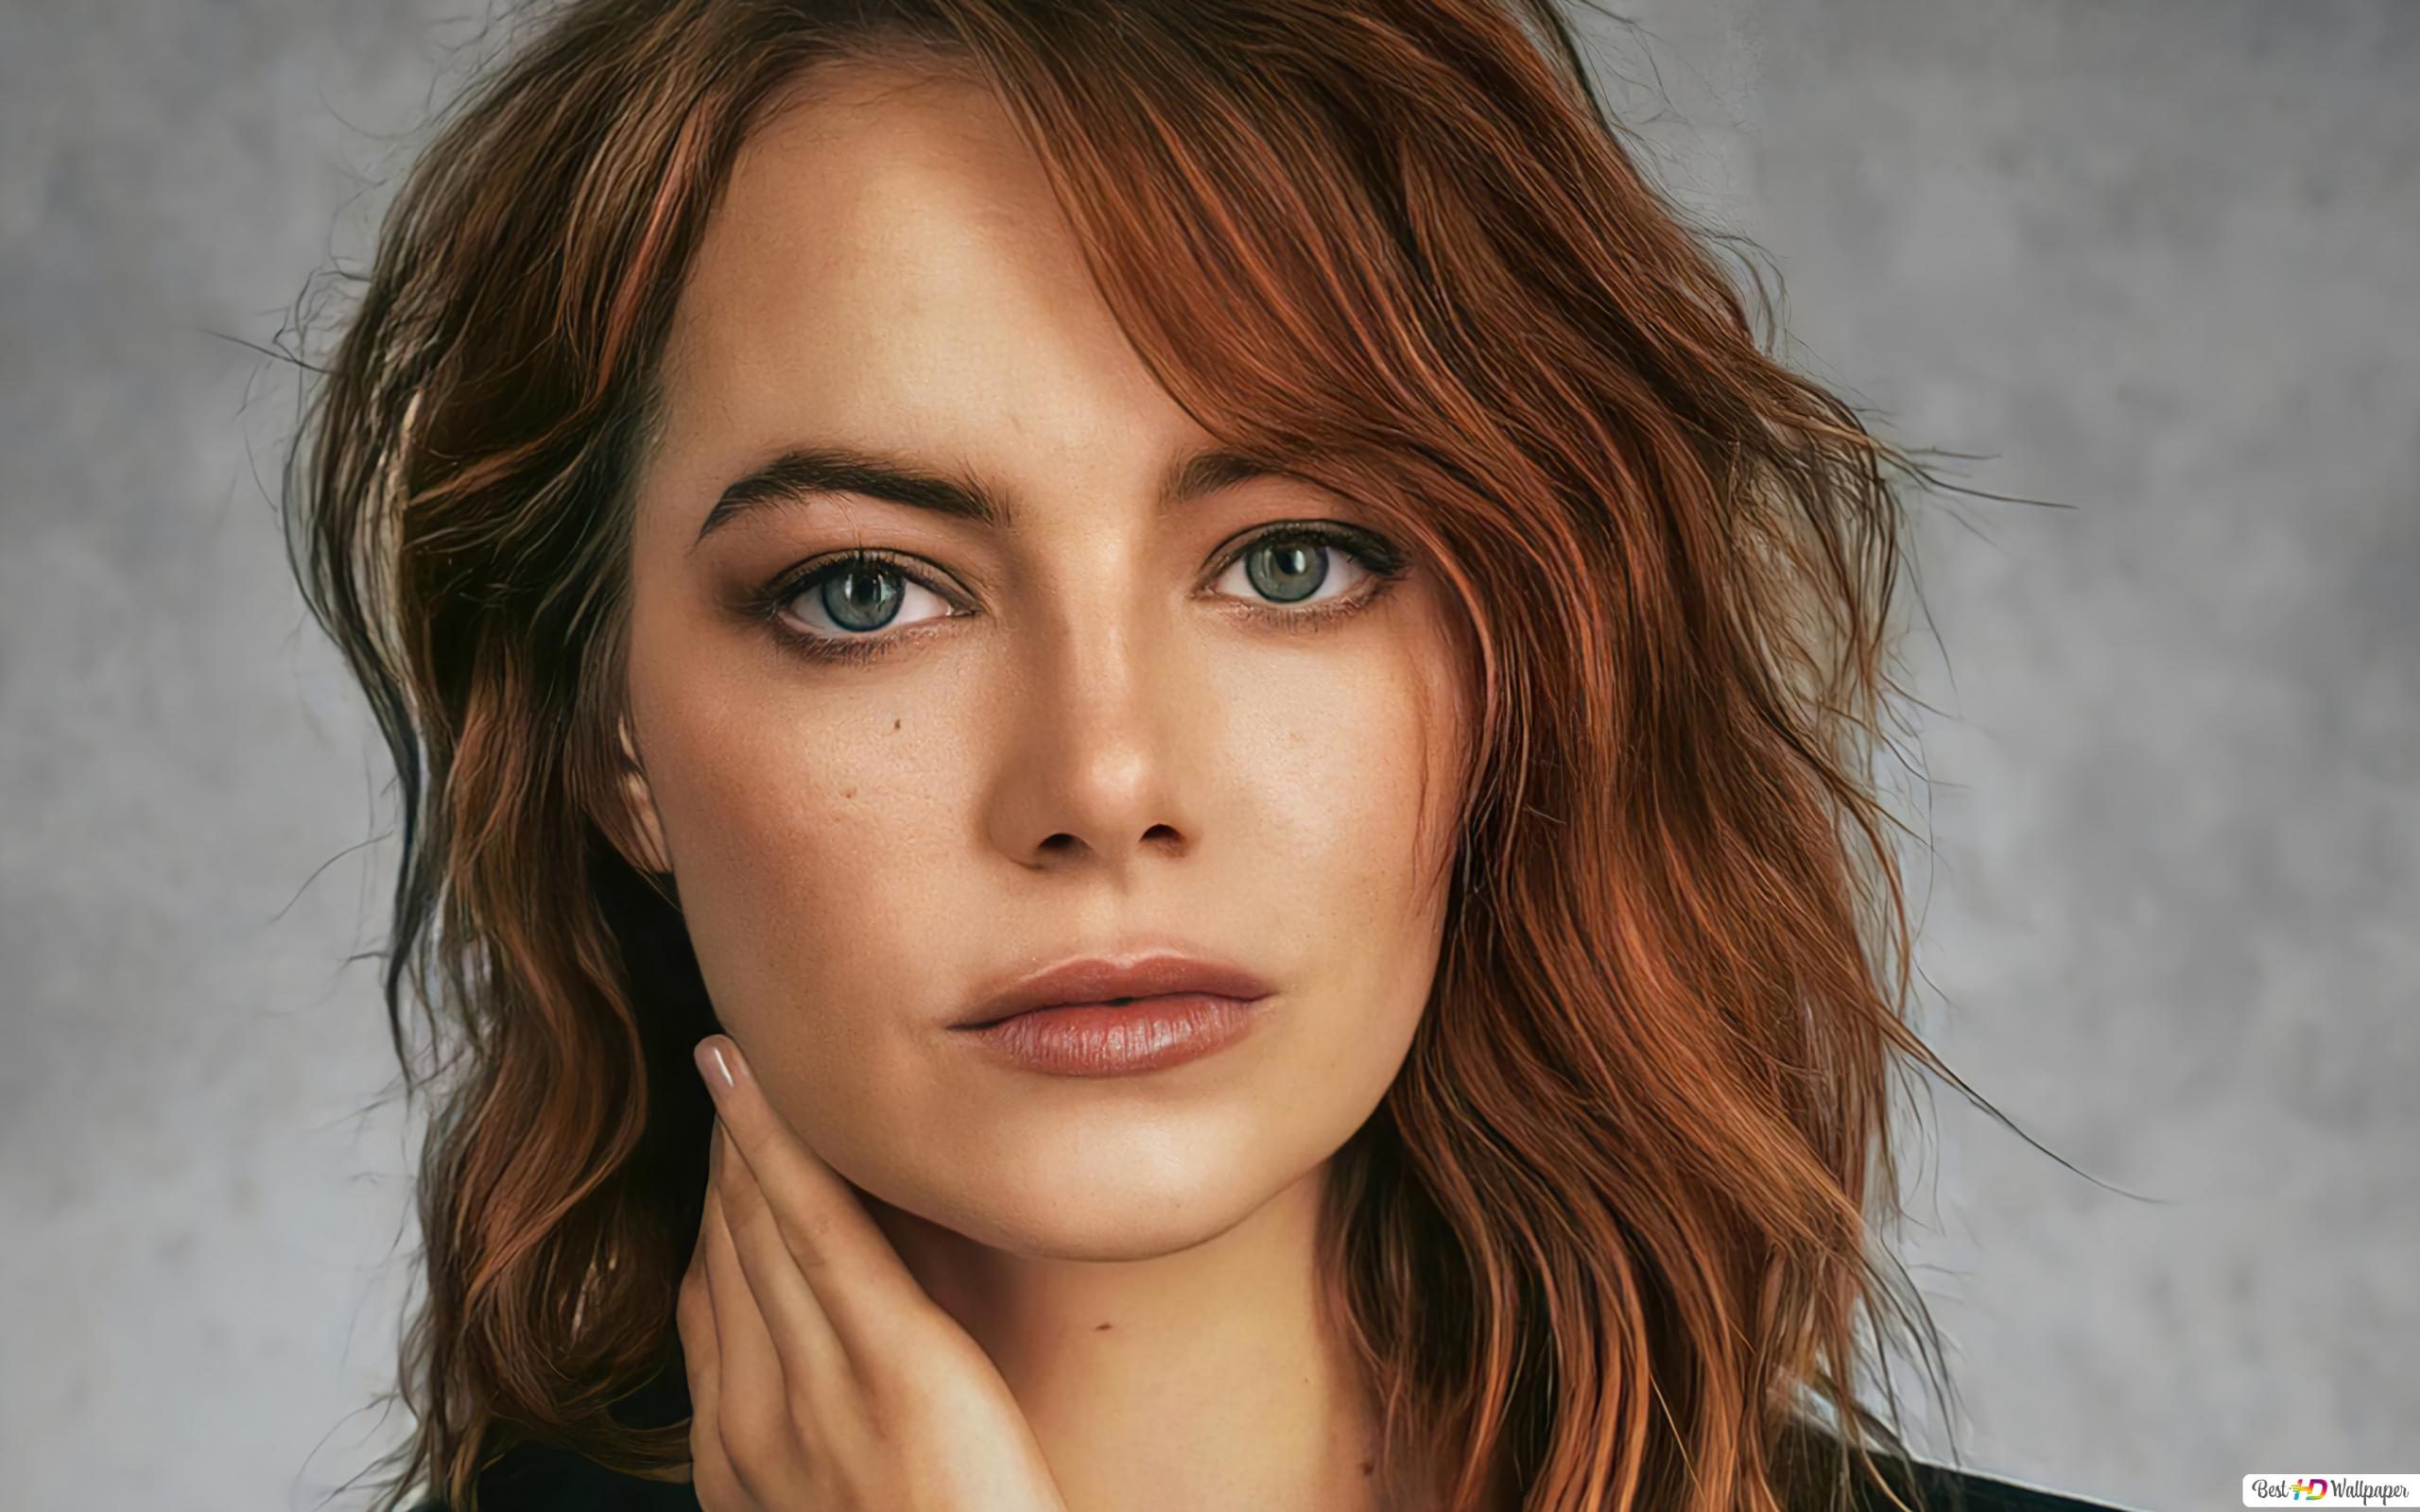 Emma Stone Blond American Actress Wallpapers